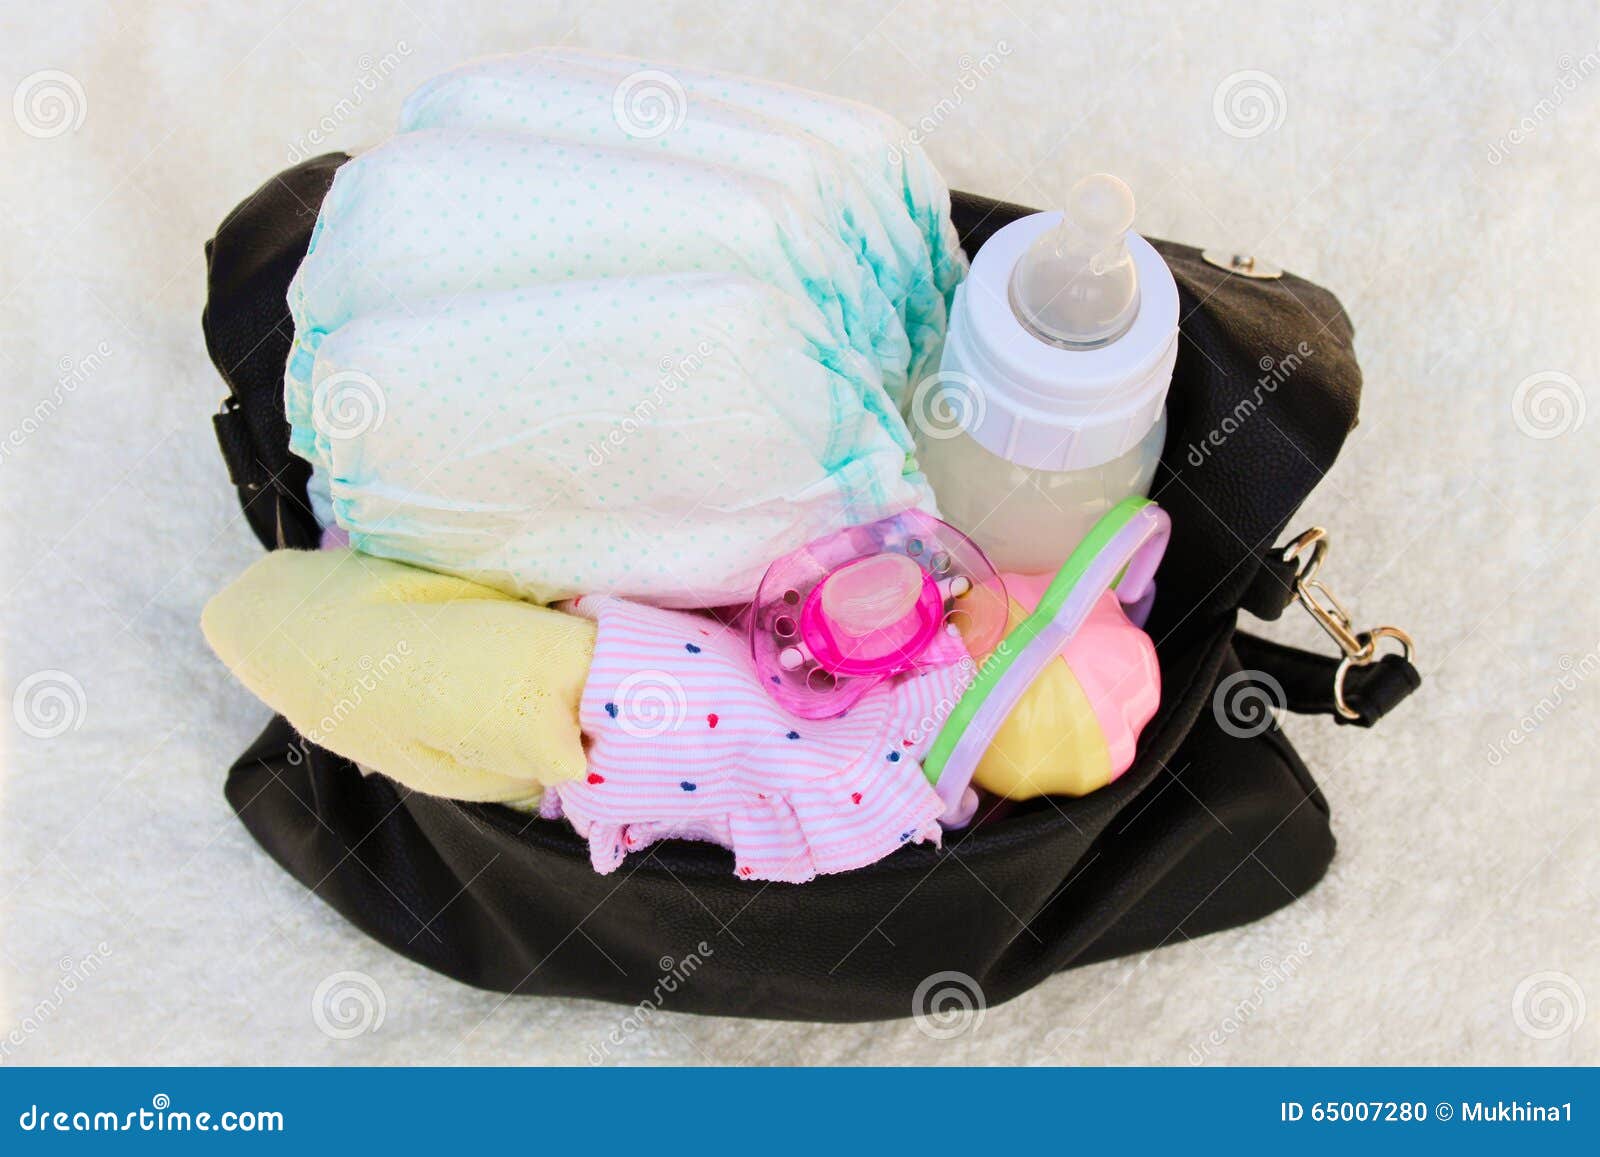 Handbag with Items To Care for Child Stock Photo - Image of apparel ...